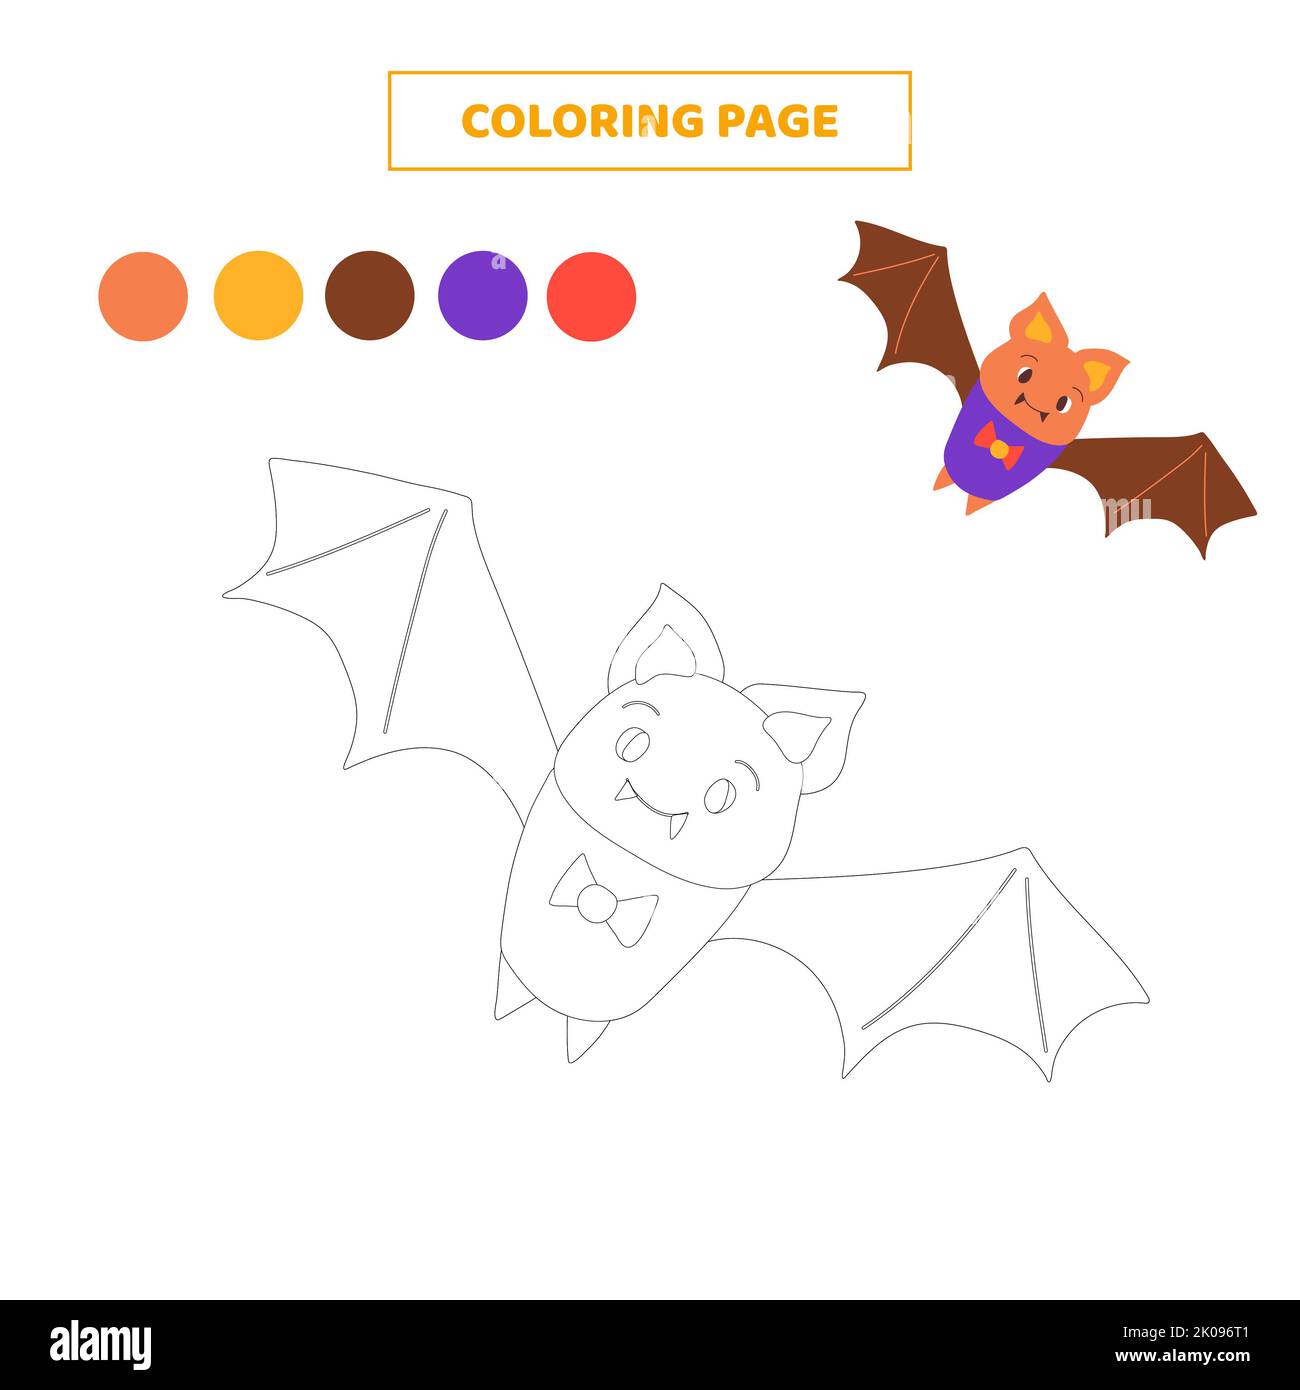 Coloring page.Color cute cartoon bat. worksheet for kids. Stock Photo